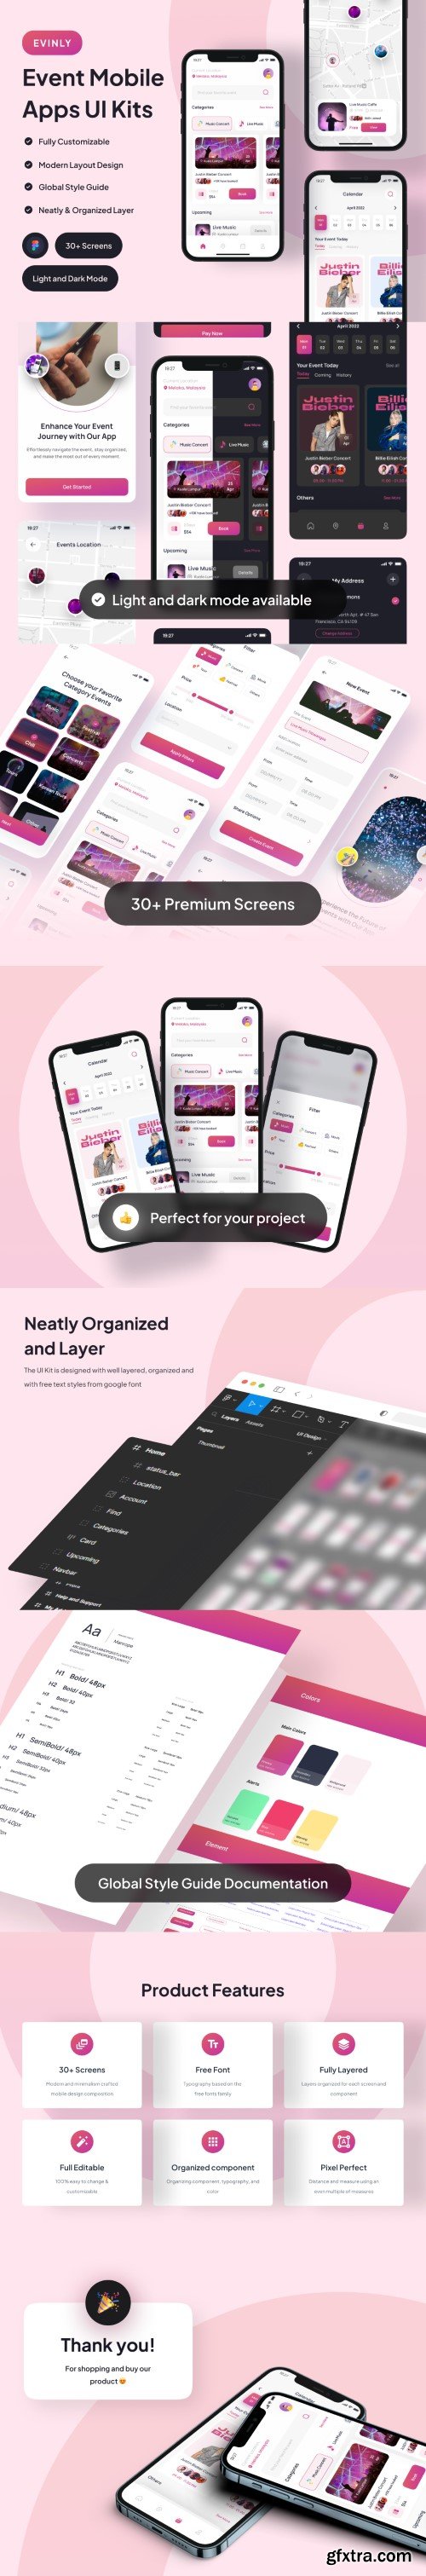 UI8 - Evinly - Event Mobile Apps UI Kits